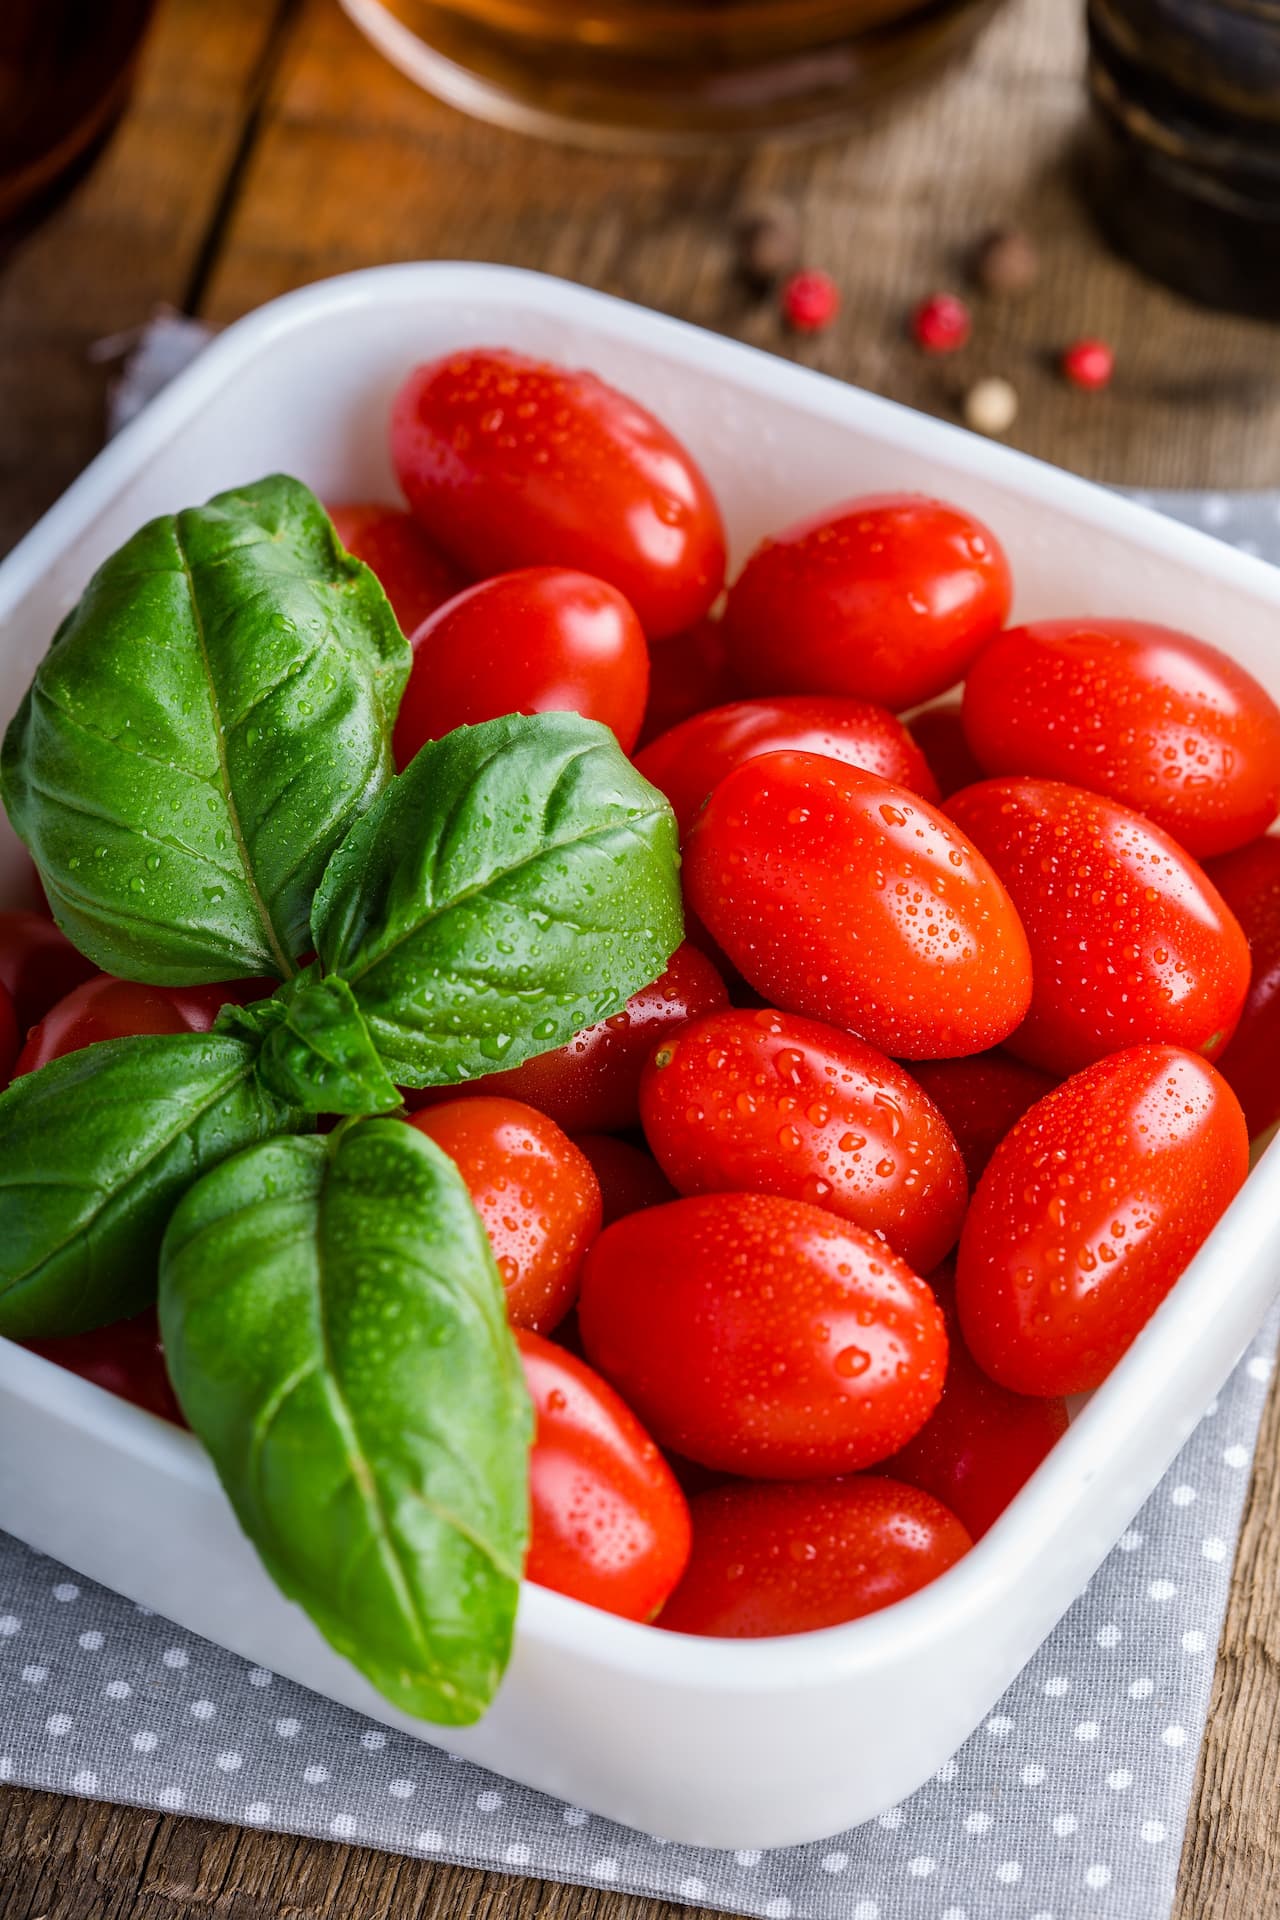 Sprig of basil in dish with grape tomatoes